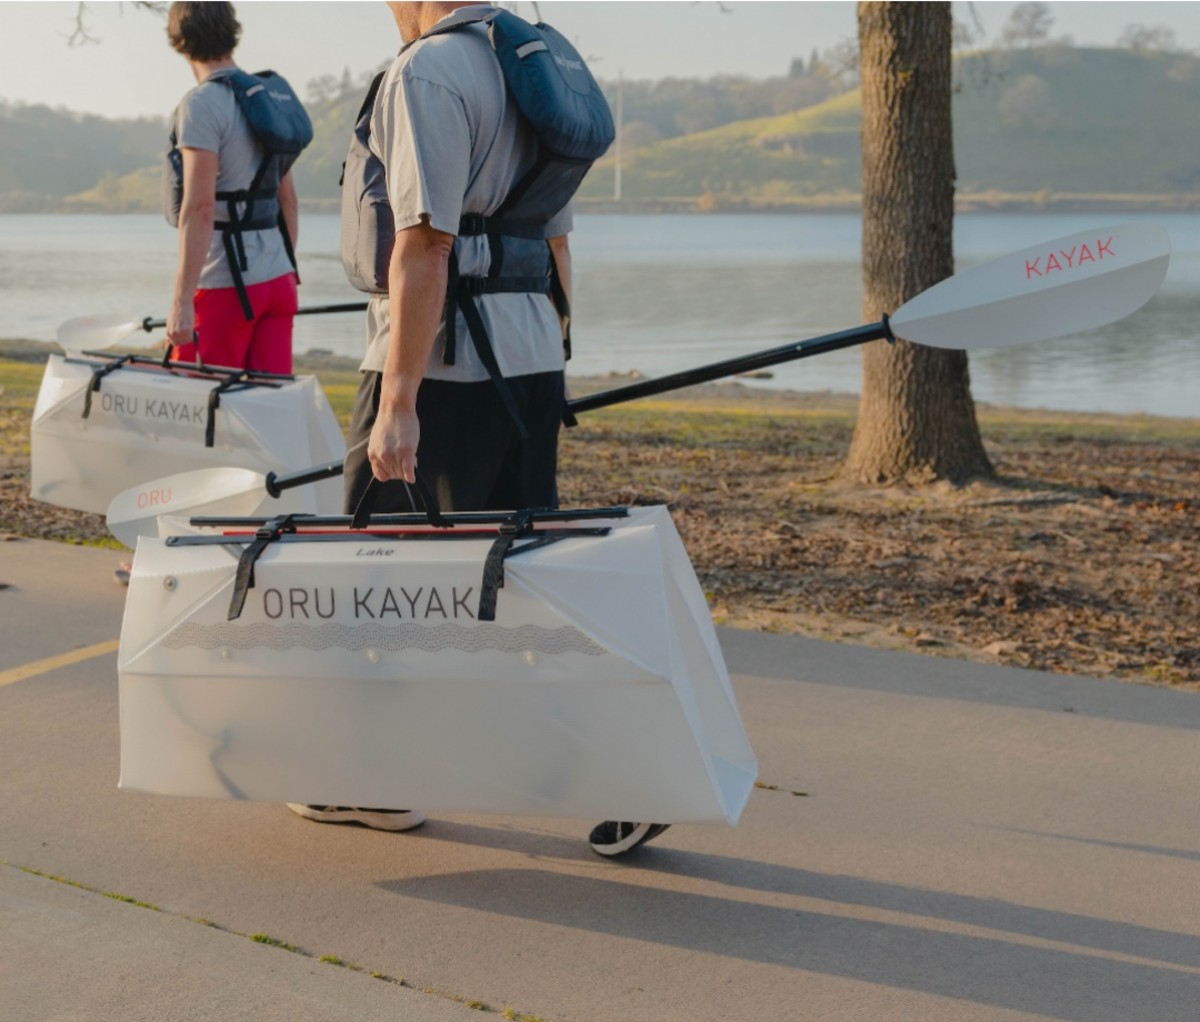 Oru's Lake kayak is the latest—and lightest—foldable kayak on the market and easily fits in the back of a vehicle.